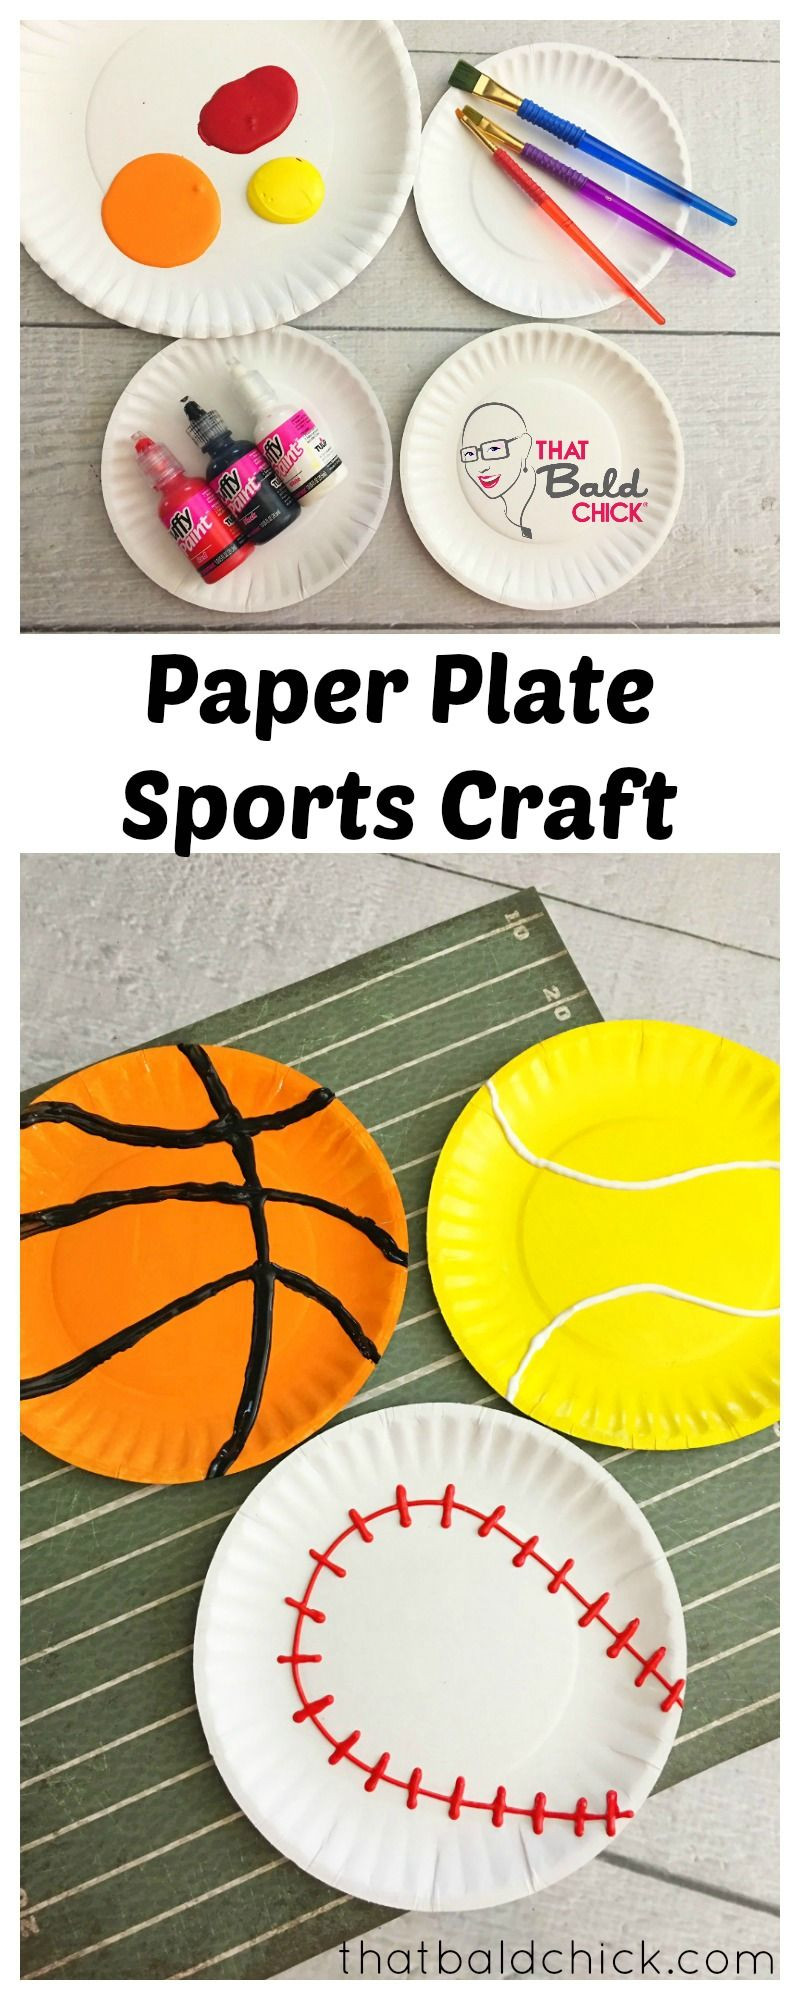 Sports Craft For Toddlers
 Paper Plate Sports Craft at thatbaldchick via